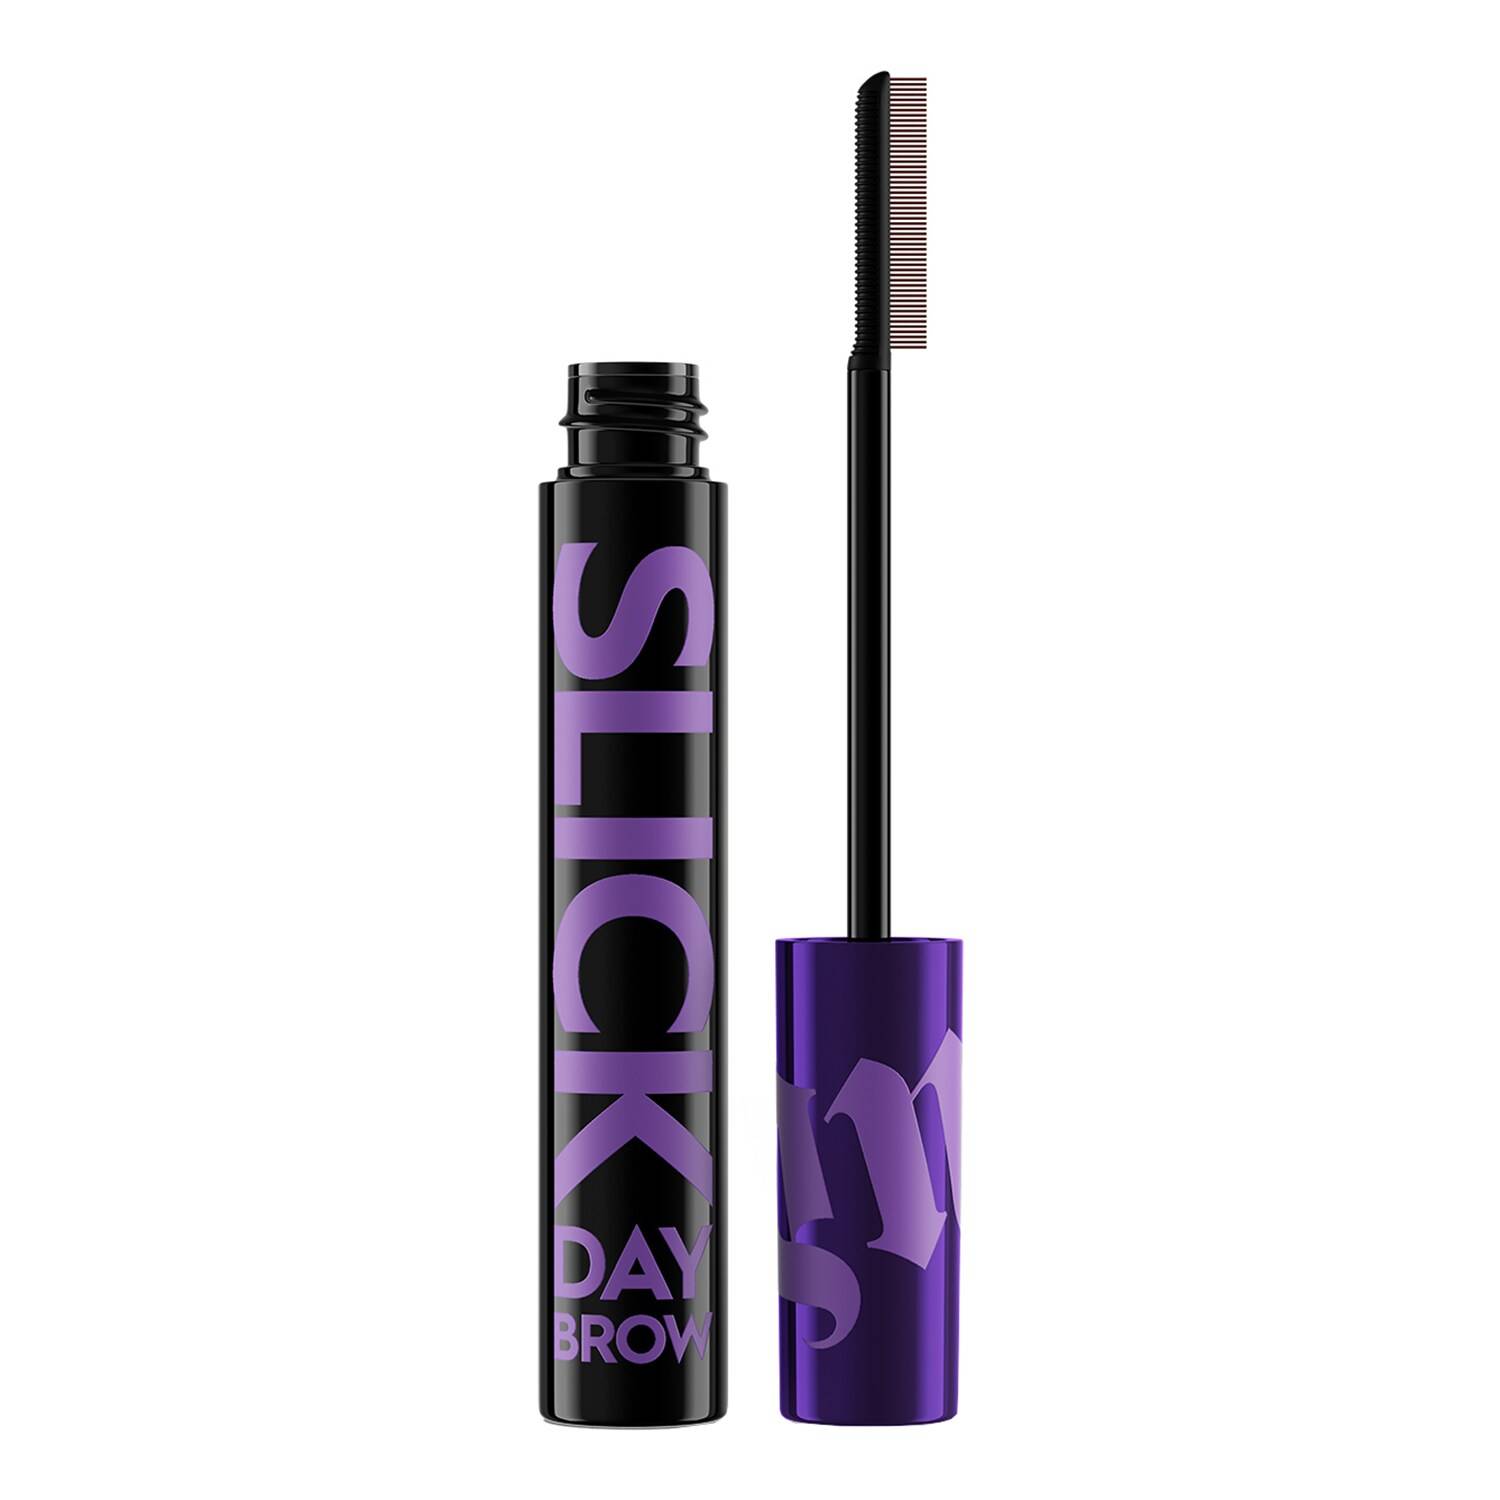 Urban Decay Clear Slick Day Brow Clear